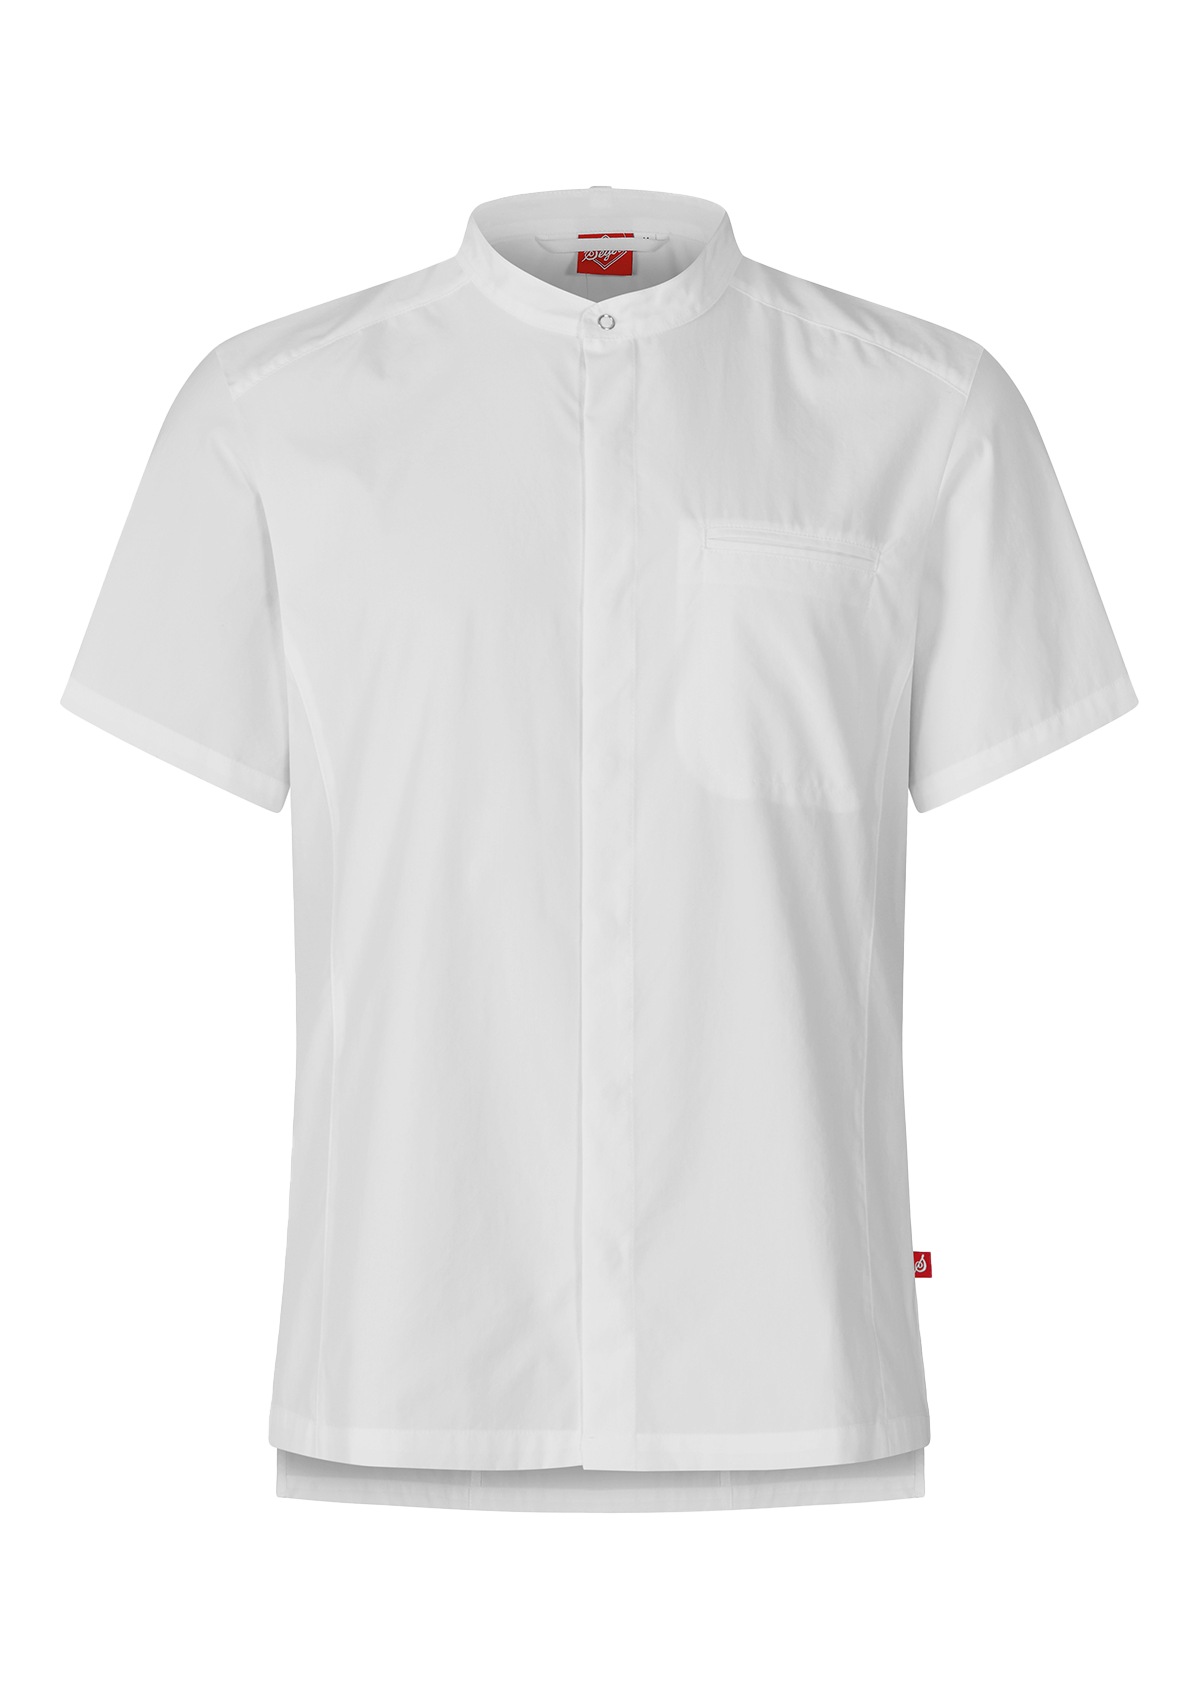 Unisex Short-Sleeved Chef's Shirt Action Inspired By The World Of Sports